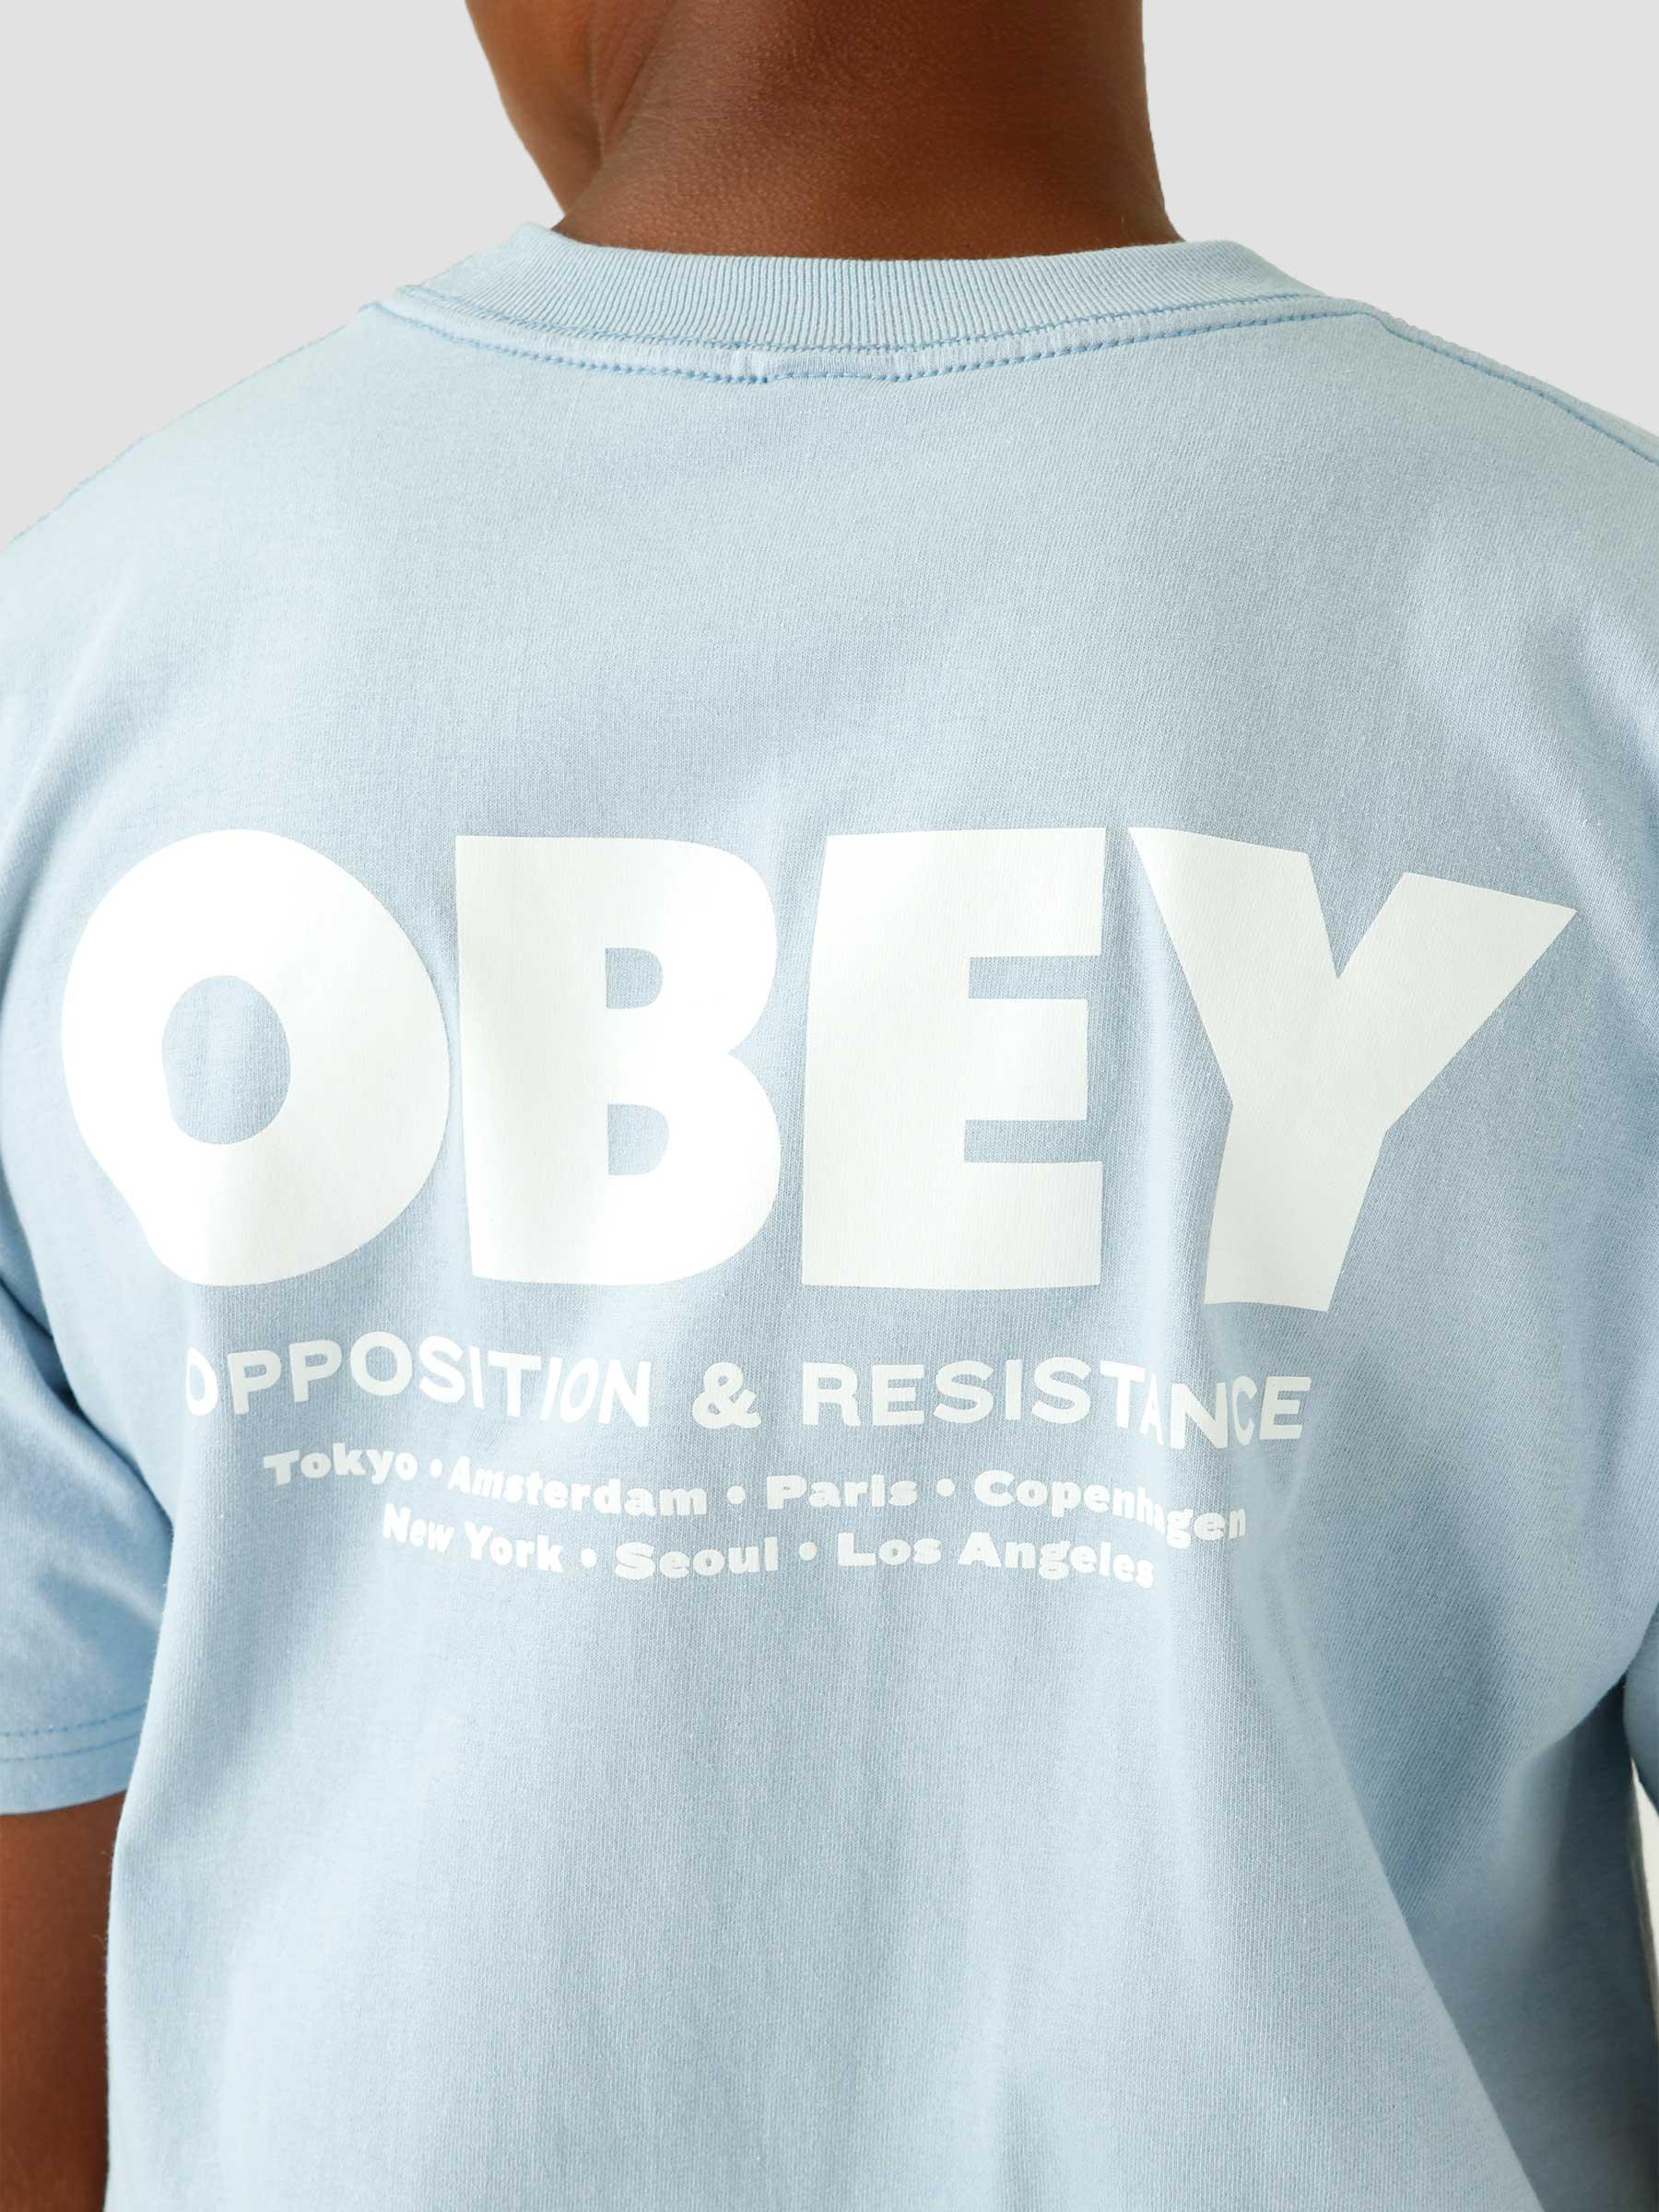 Obey Opposition & Resistance T-shirt Good Grey 165263234